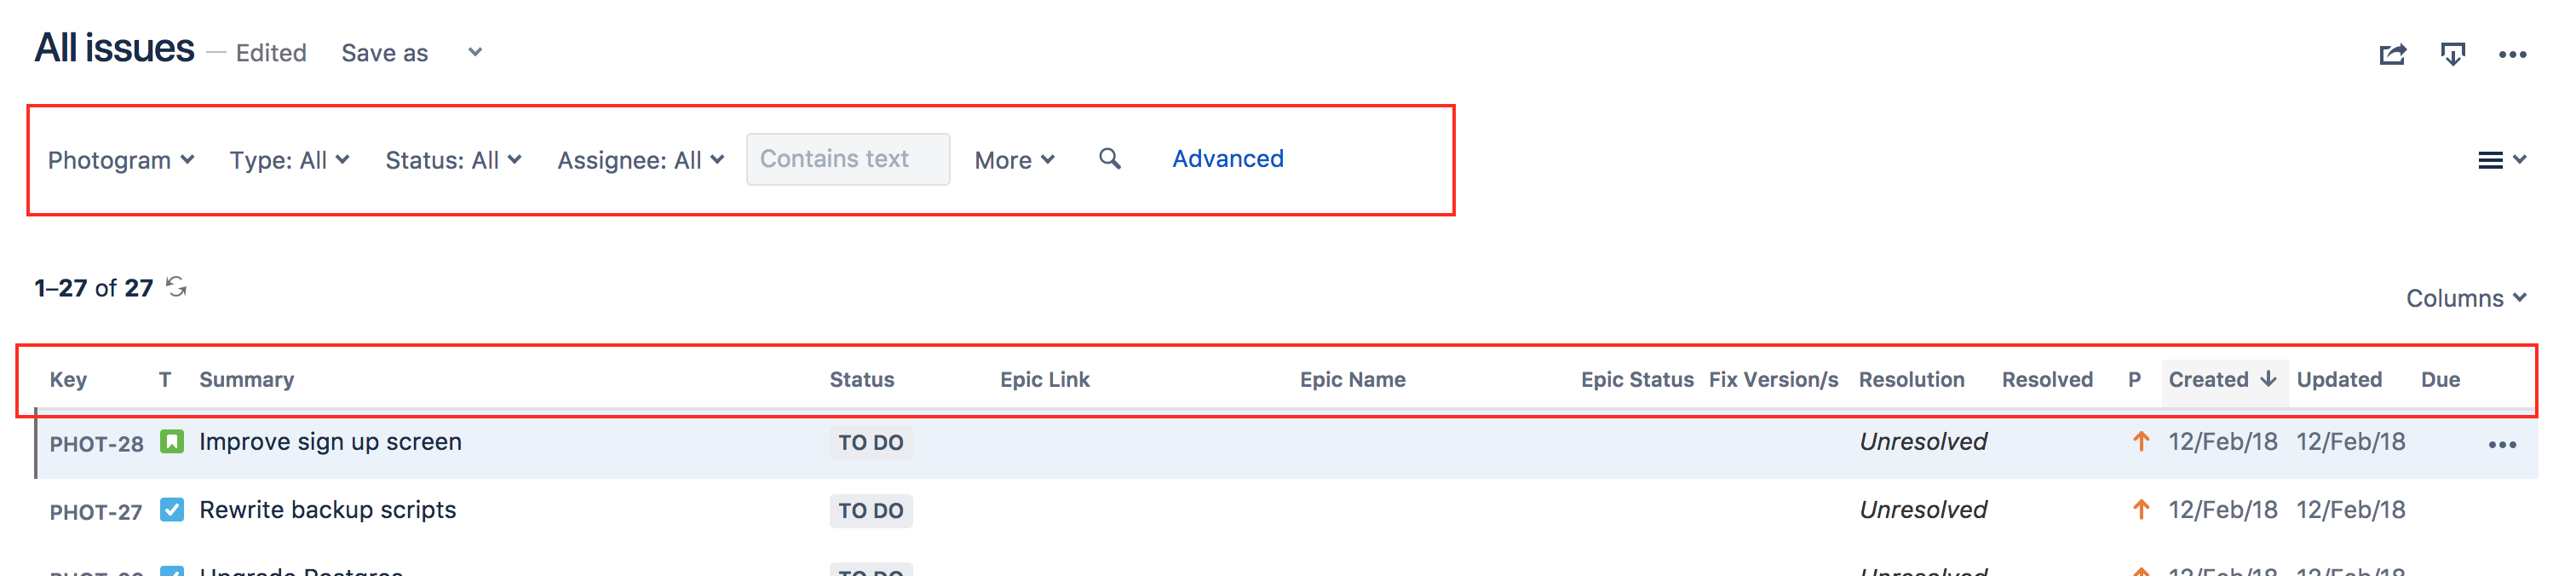 JIRA filter columns and options